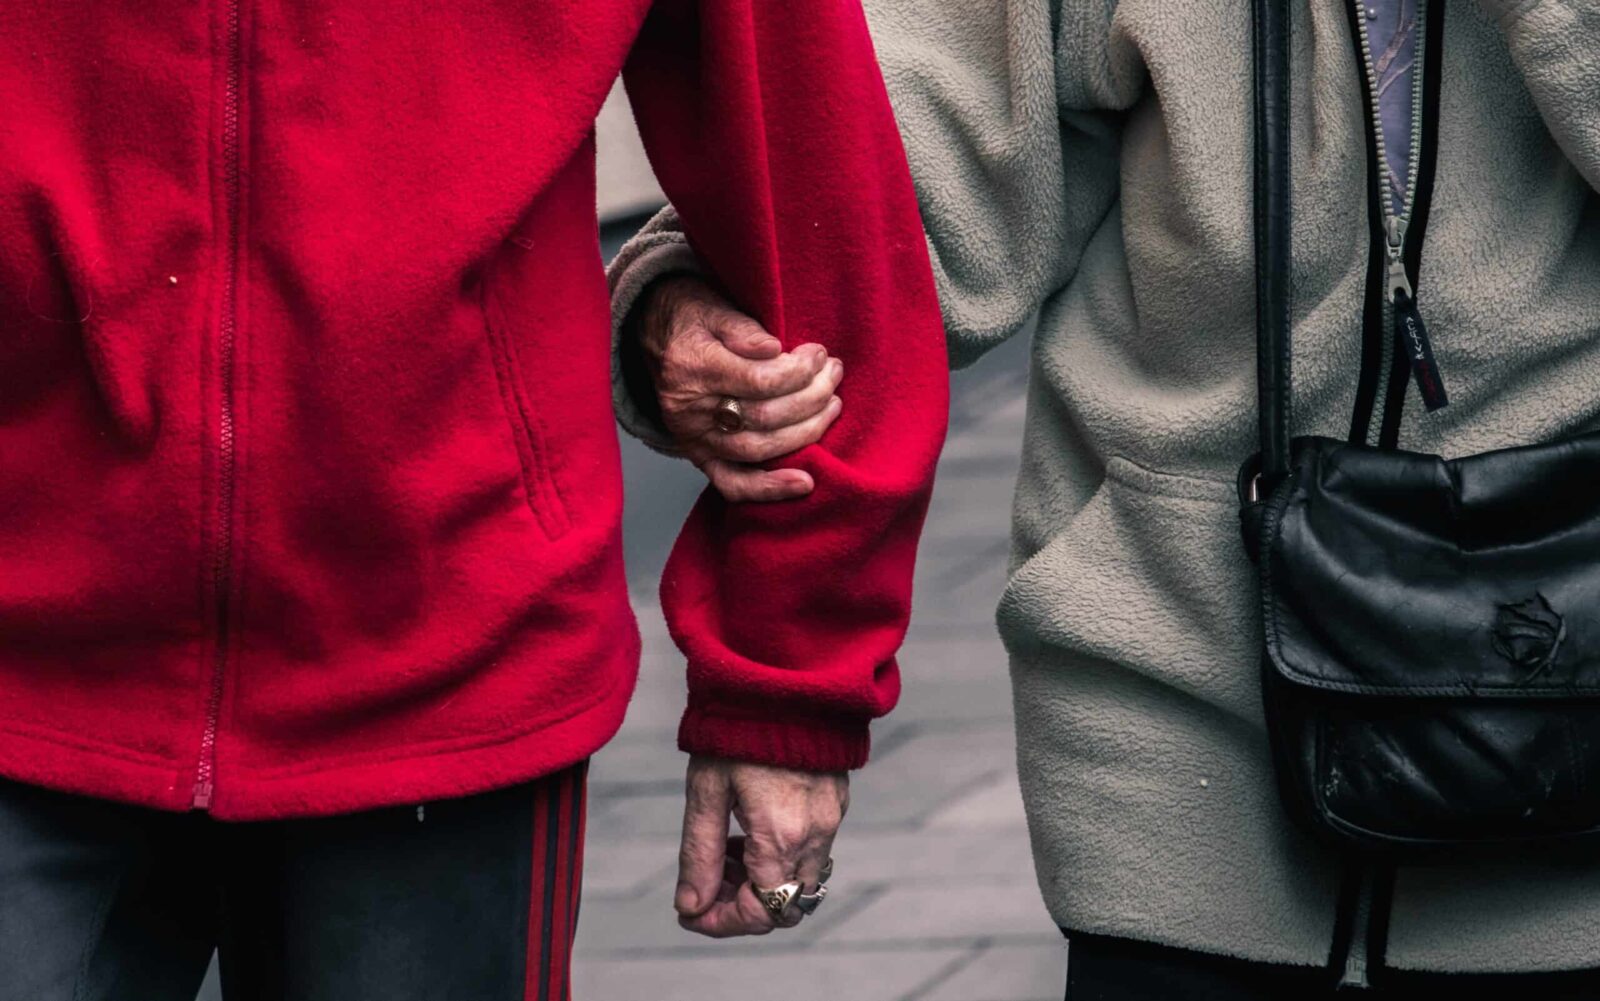 Two elderly ladies in a red and grey jacket. One is supporting the other by holding her arm. Together we can fight the stigma of mental healthcare. Together we all can overcome shame and the stigma of psychiatry and mental healthcare.  